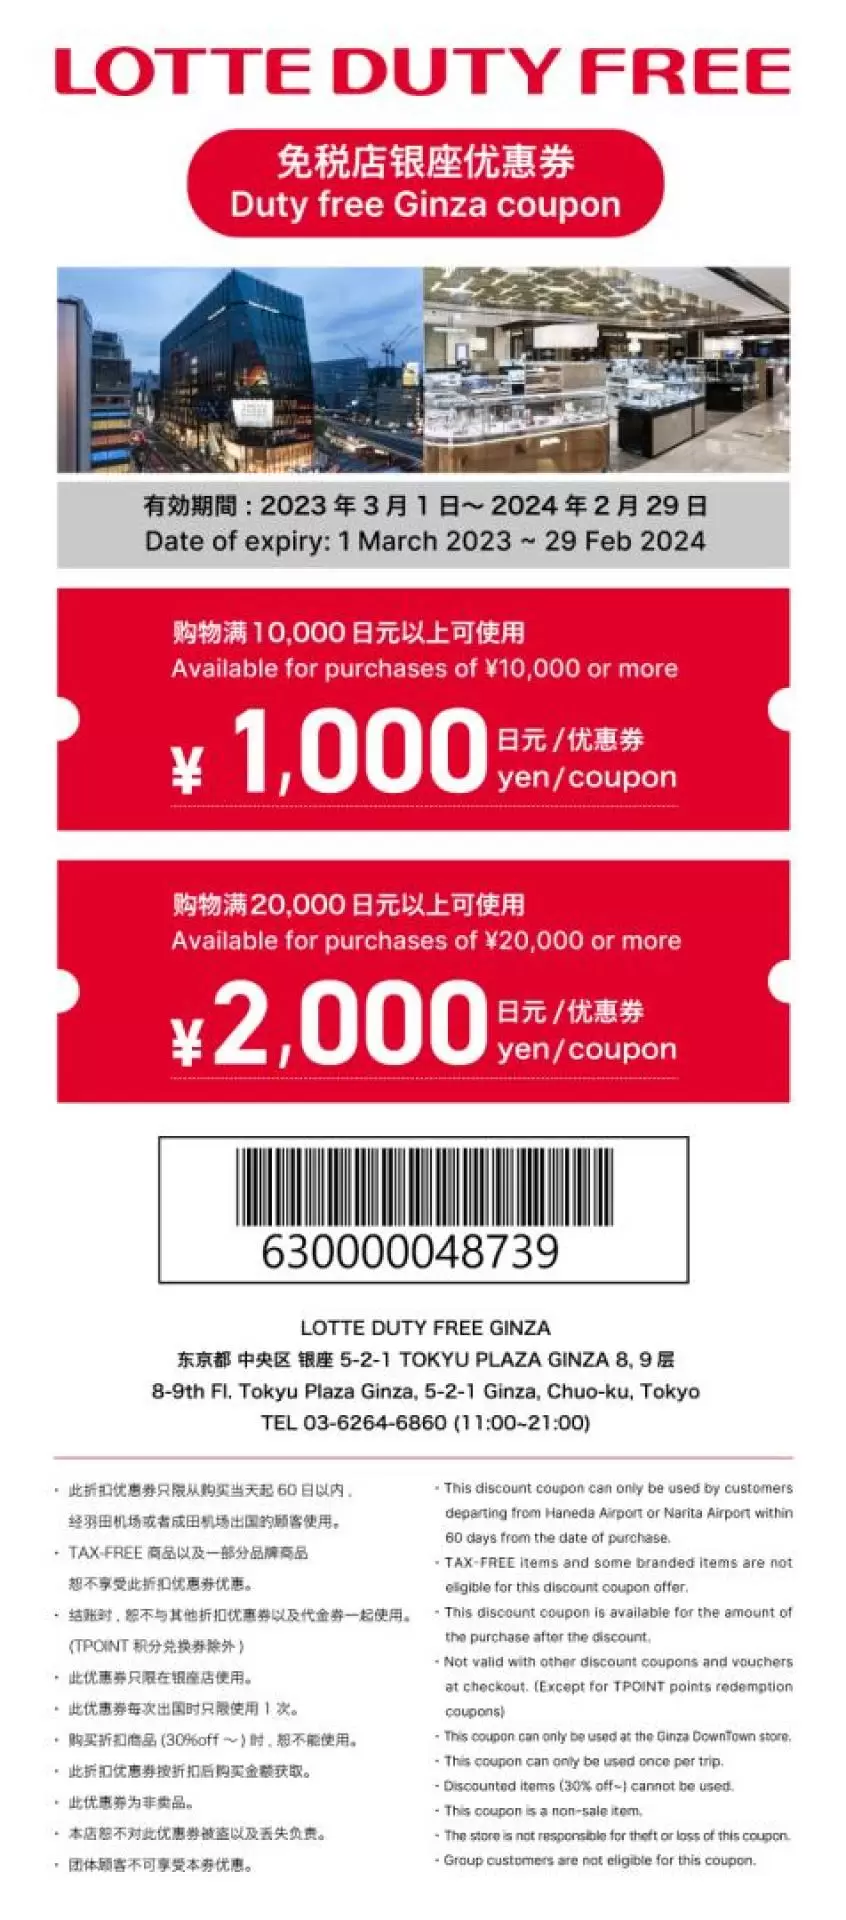 TOKYO GINZA LOTTE DUTY FREE COUPON 